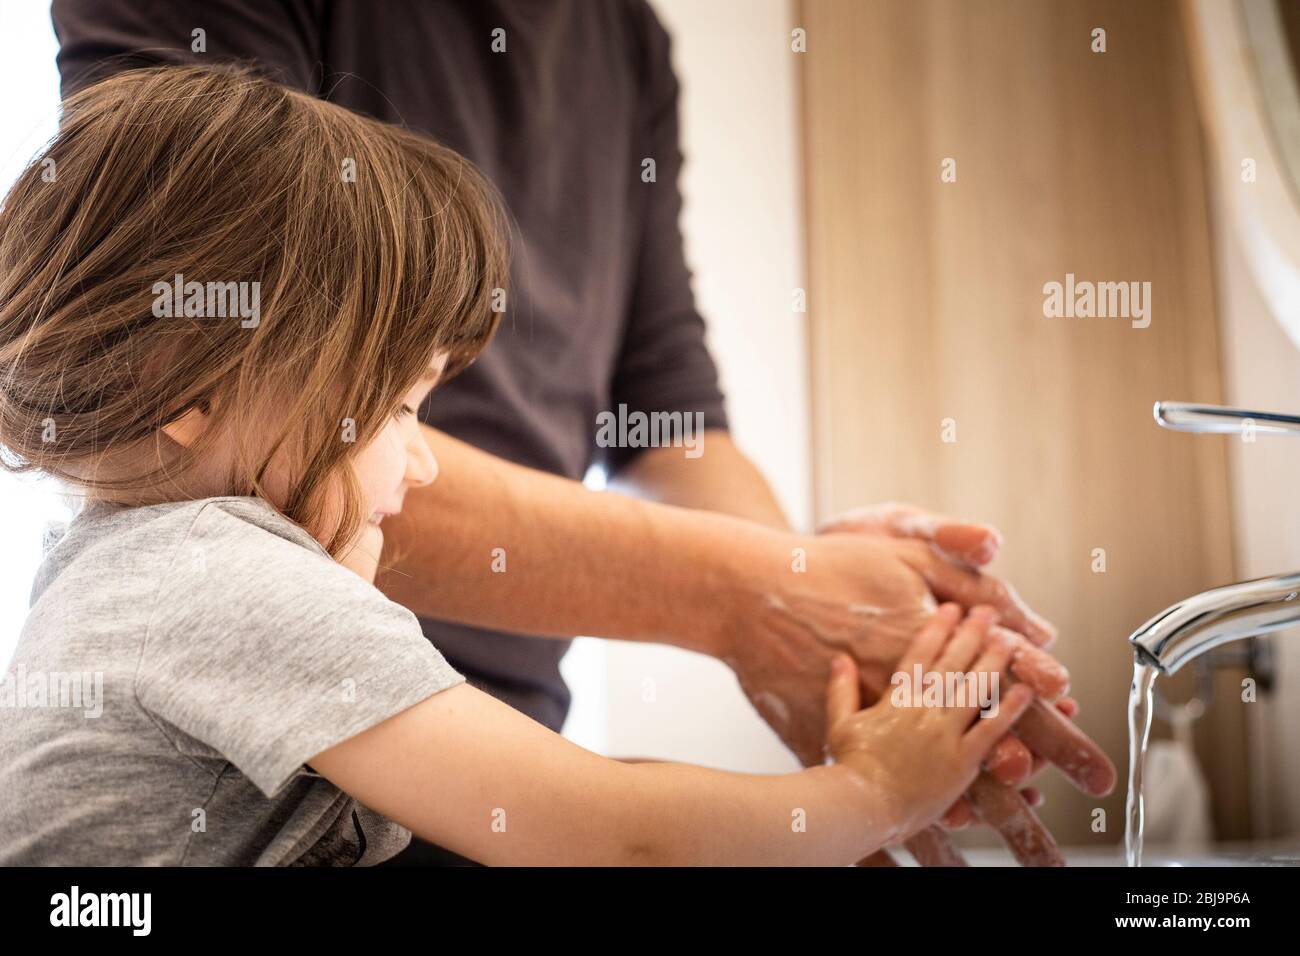 Caucasian father teaching little child girl how to wash hands in bathroom during covid-19 pandemic lockdown. Dad and baby daughter washing hands at si Stock Photo